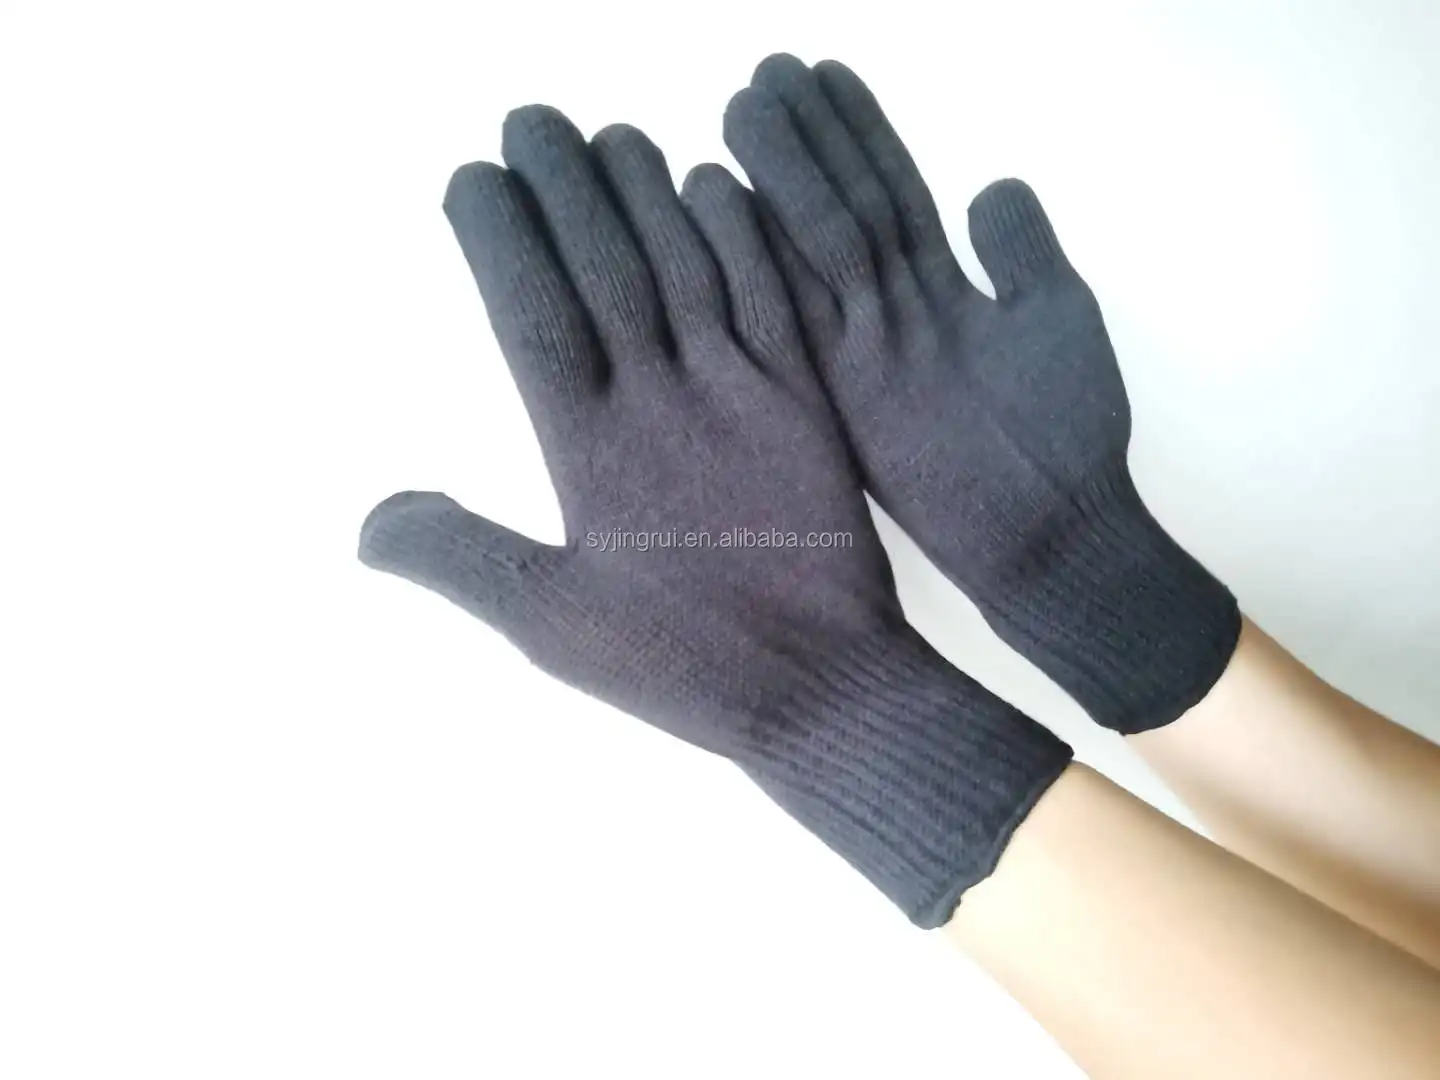 Heat Resistant Gloves For Hair Styling Tools Professional Heat Proof Glove  For Hot Curling Iron Wands Flat Iron Universal Size - Buy Curling Rod Heat  Insulation Gloves,Heat Resistant Glove For Hair Styling,Curling